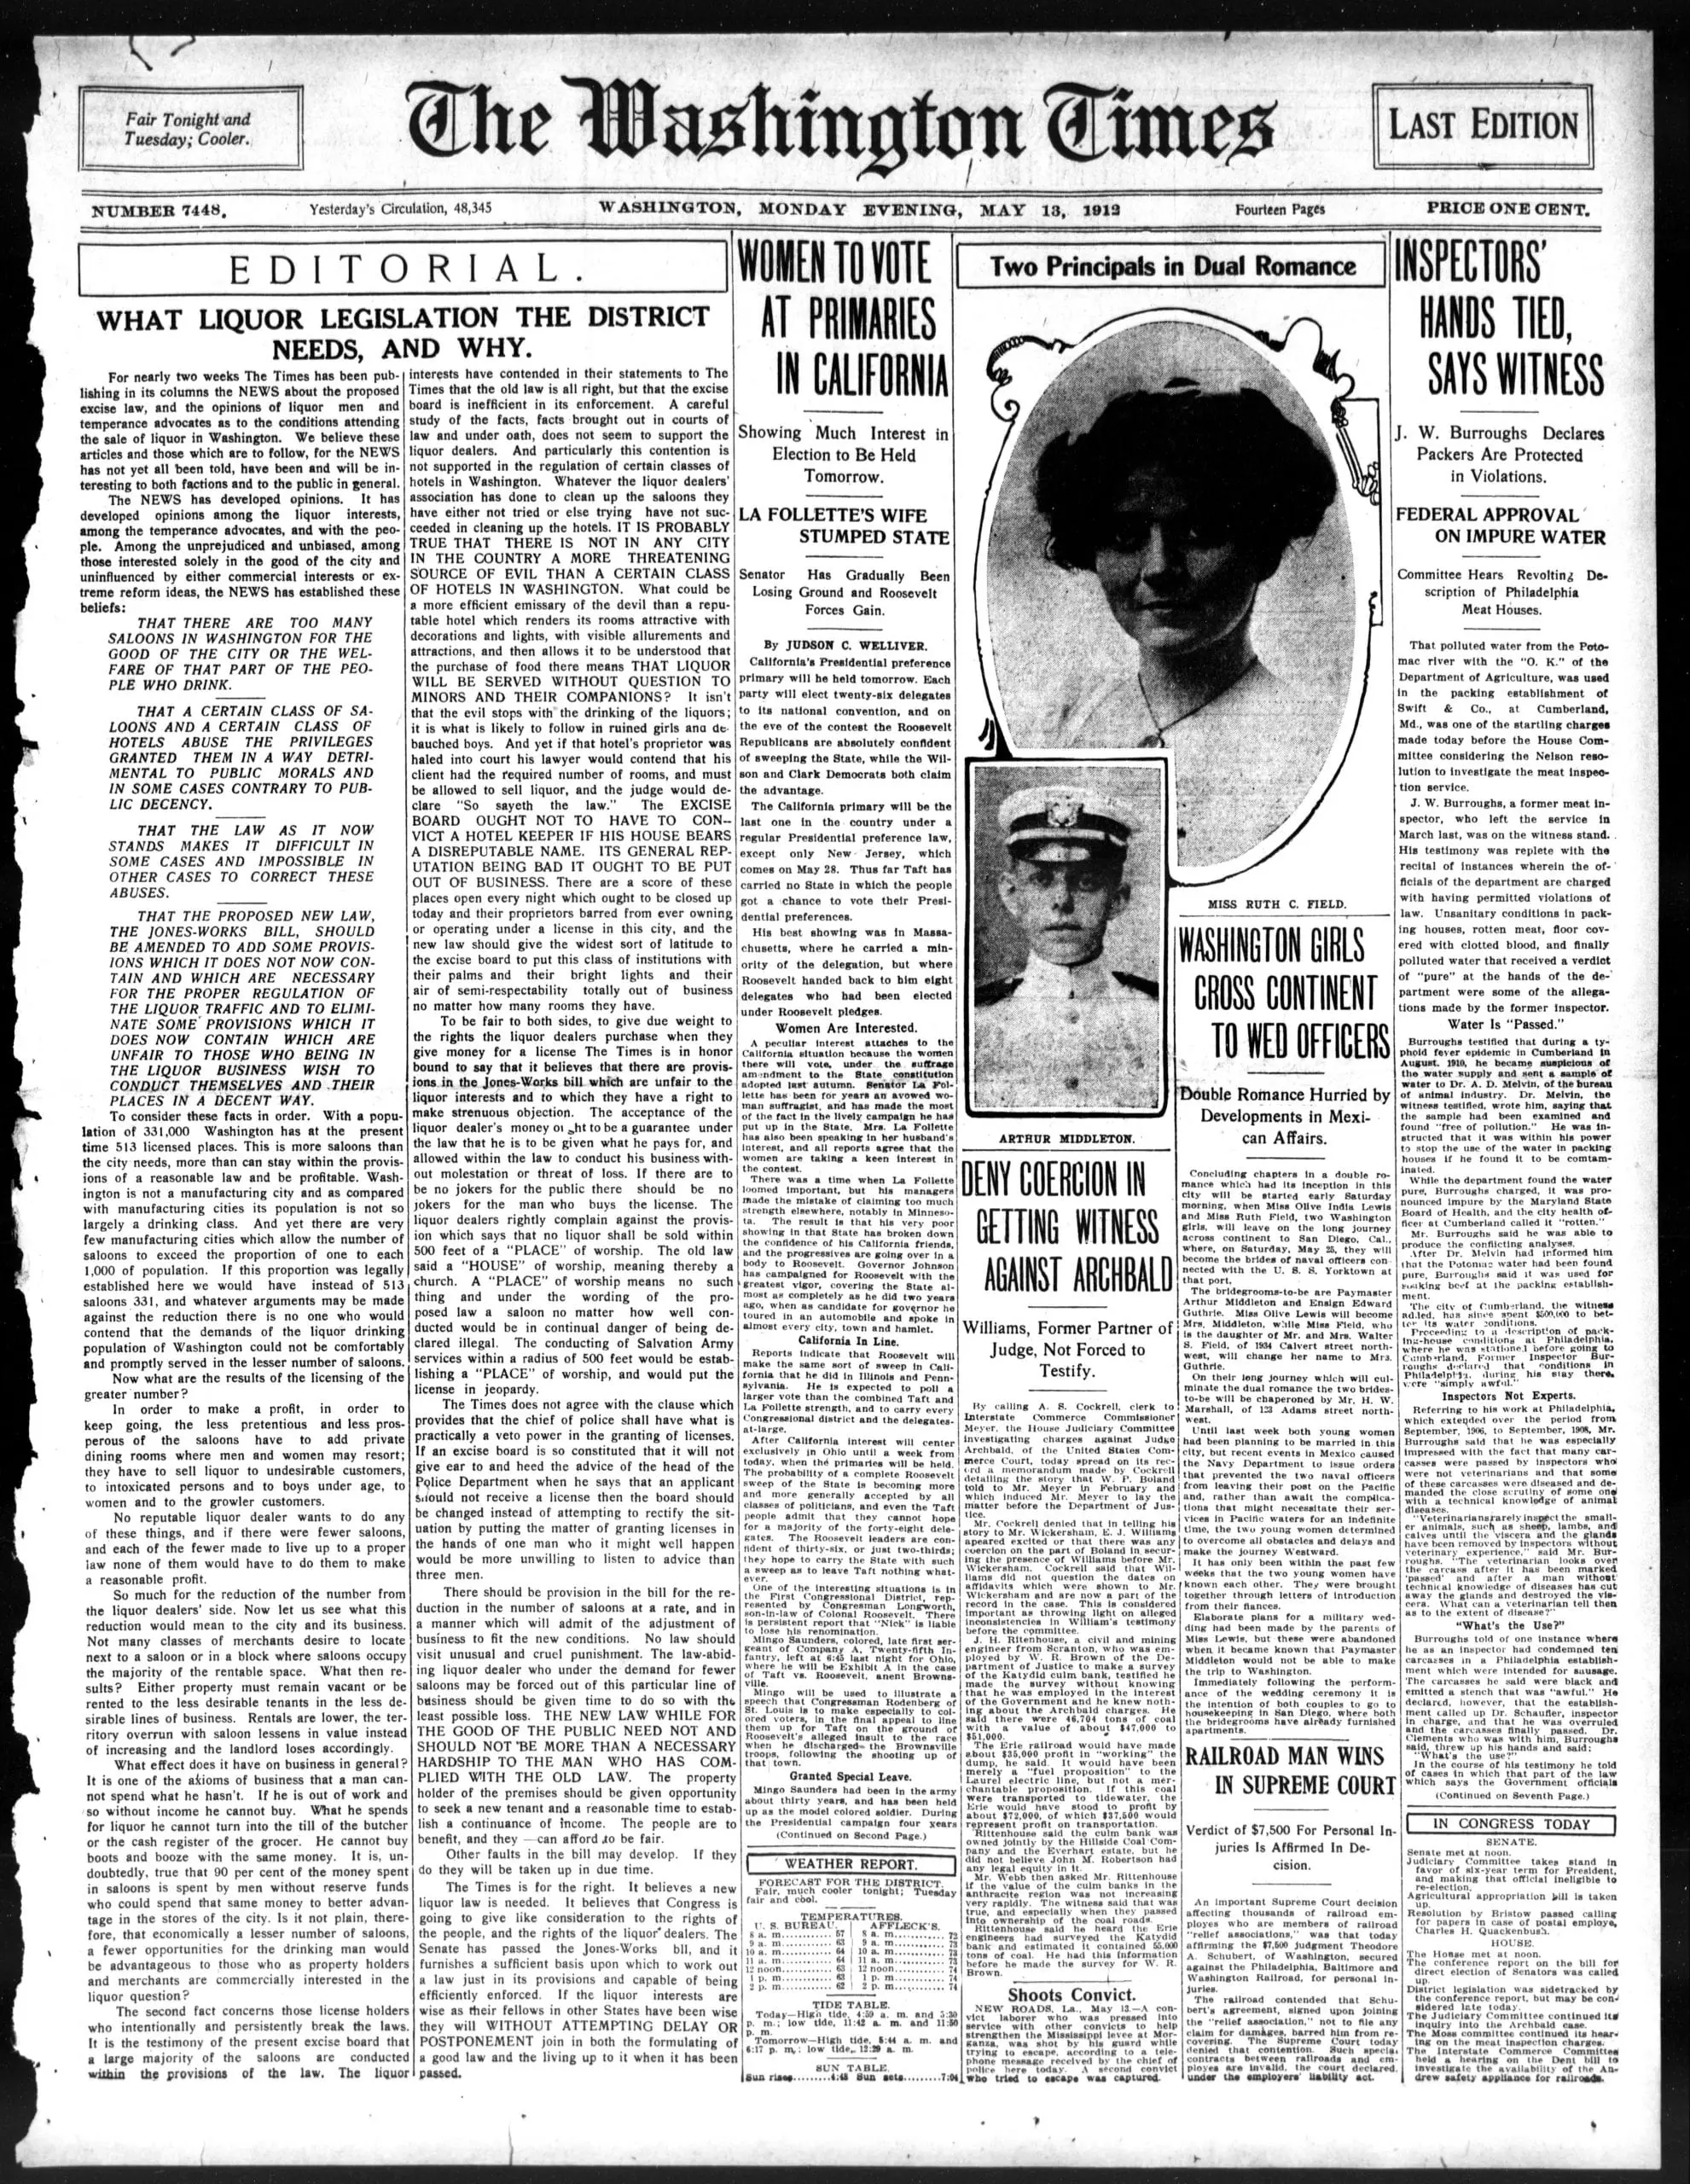 front page of the Washington Times - May 13th, 1912